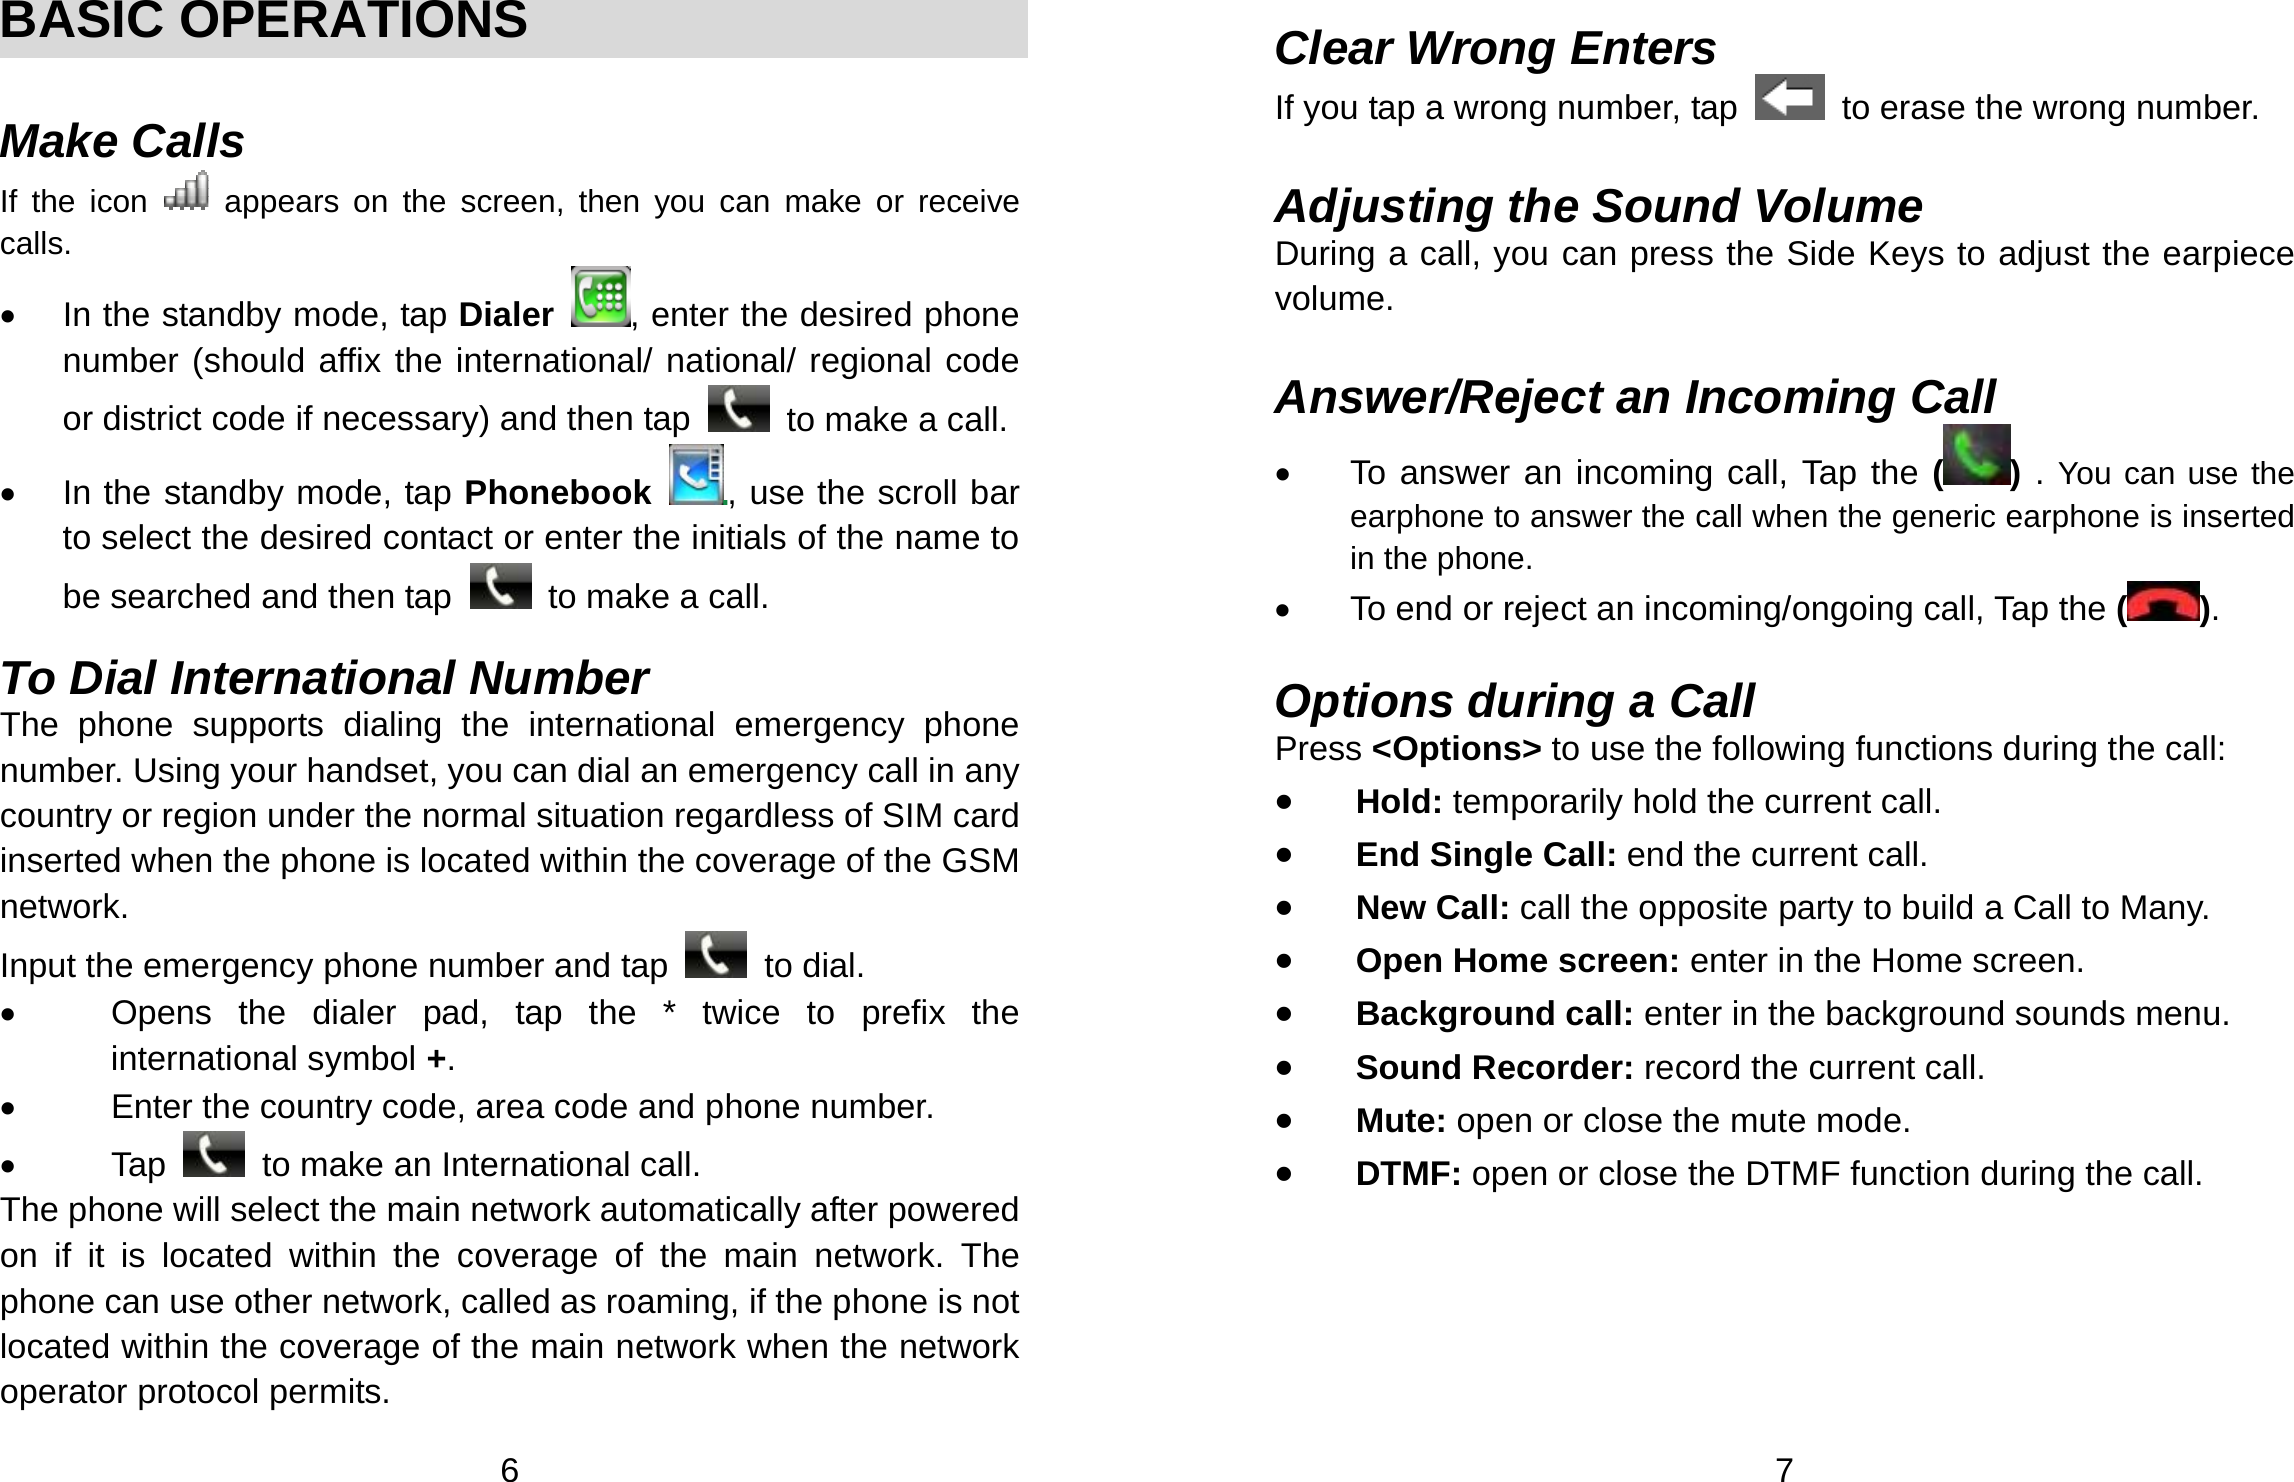  6  BASIC OPERATIONS  Make Calls If the icon   appears on the screen, then you can make or receive calls. •  In the standby mode, tap Dialer  , enter the desired phone number (should affix the international/ national/ regional code or district code if necessary) and then tap    to make a call. •  In the standby mode, tap Phonebook  , use the scroll bar to select the desired contact or enter the initials of the name to be searched and then tap    to make a call.  To Dial International Number The phone supports dialing the international emergency phone number. Using your handset, you can dial an emergency call in any country or region under the normal situation regardless of SIM card inserted when the phone is located within the coverage of the GSM network.  Input the emergency phone number and tap   to dial.  •  Opens the dialer pad, tap the * twice to prefix the international symbol +. •  Enter the country code, area code and phone number. • Tap   to make an International call. The phone will select the main network automatically after powered on if it is located within the coverage of the main network. The phone can use other network, called as roaming, if the phone is not located within the coverage of the main network when the network operator protocol permits.  7  Clear Wrong Enters If you tap a wrong number, tap    to erase the wrong number.    Adjusting the Sound Volume During a call, you can press the Side Keys to adjust the earpiece volume.  Answer/Reject an Incoming Call •  To answer an incoming call, Tap the ( ) . You can use the earphone to answer the call when the generic earphone is inserted in the phone.     •  To end or reject an incoming/ongoing call, Tap the ( ).  Options during a Call Press &lt;Options&gt; to use the following functions during the call: • Hold: temporarily hold the current call. • End Single Call: end the current call. • New Call: call the opposite party to build a Call to Many. • Open Home screen: enter in the Home screen. • Background call: enter in the background sounds menu. • Sound Recorder: record the current call. • Mute: open or close the mute mode. • DTMF: open or close the DTMF function during the call. 